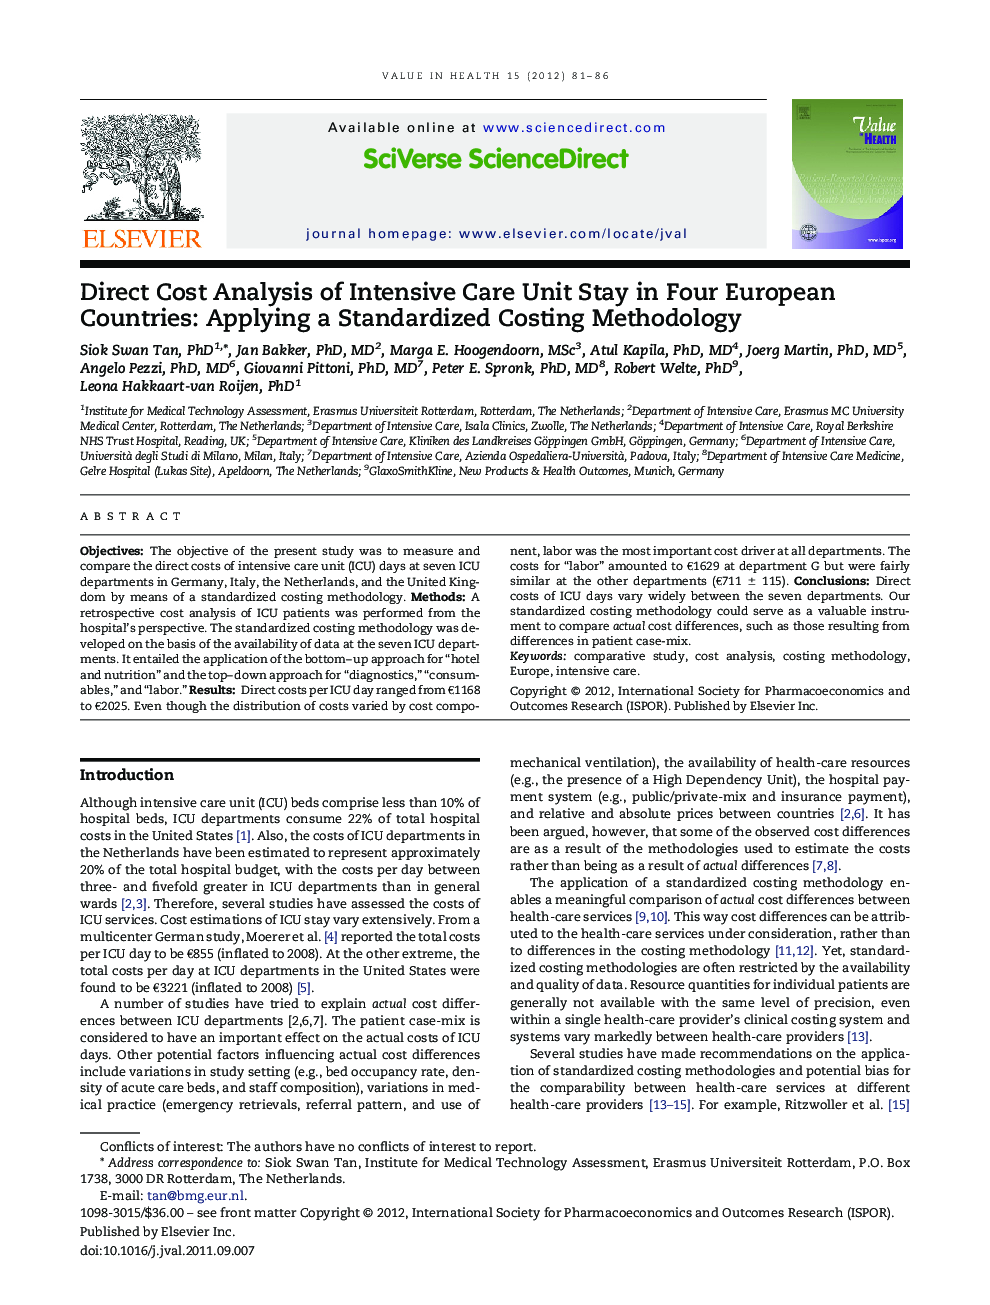 Direct Cost Analysis of Intensive Care Unit Stay in Four European Countries: Applying a Standardized Costing Methodology